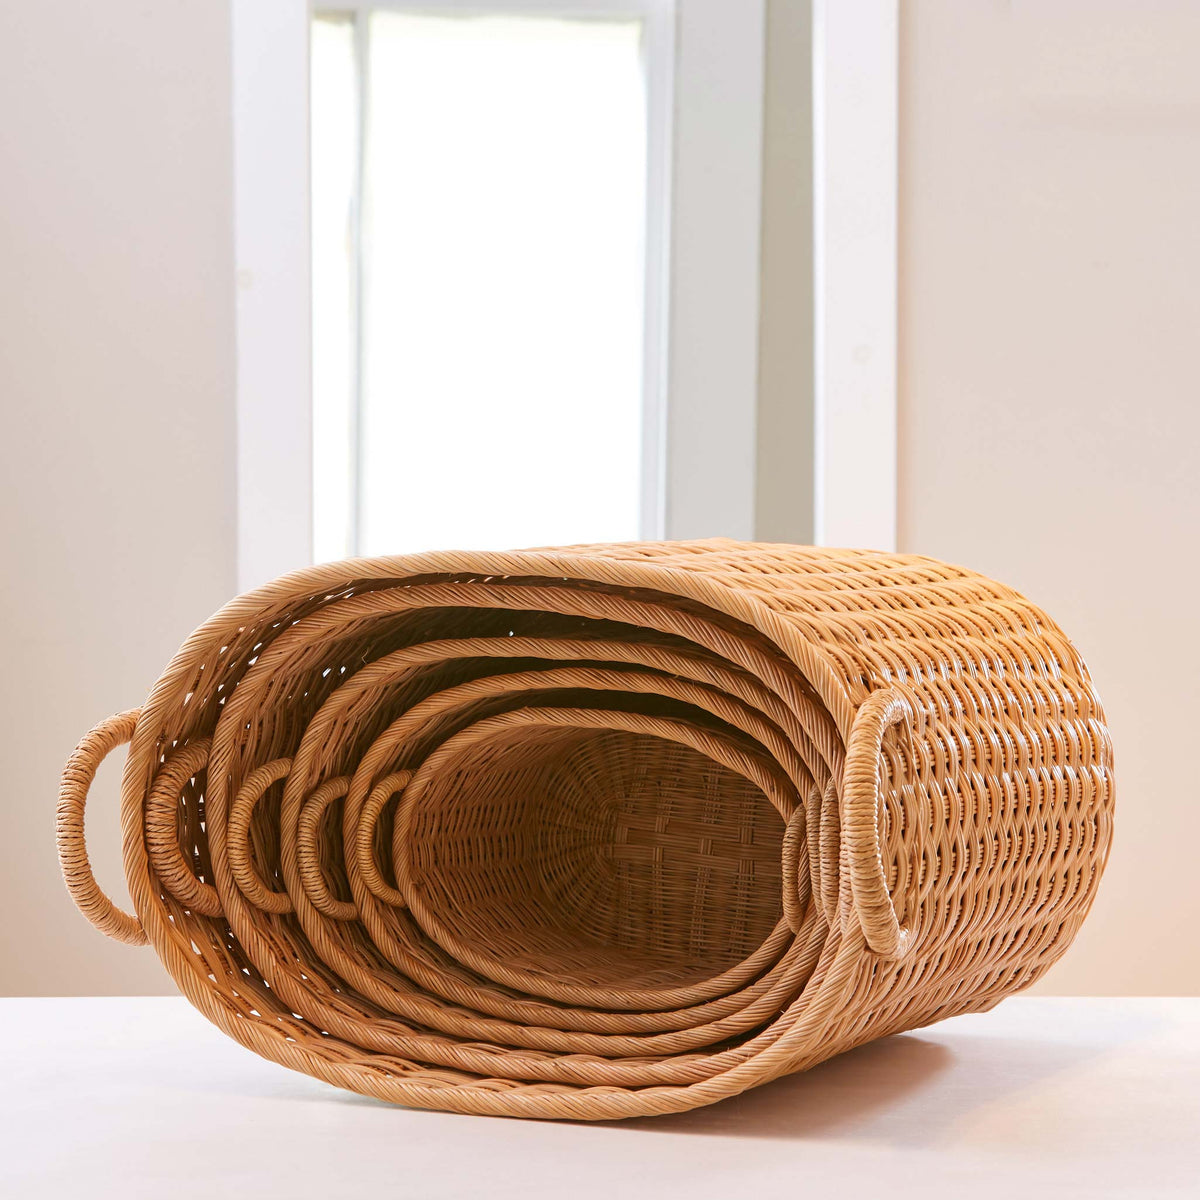 Oval rattan storage baskets. Storage baskets with lids and handles. Great baskets for storage, basket for clothes, bathroom storage. XL, L, M, S, XS.